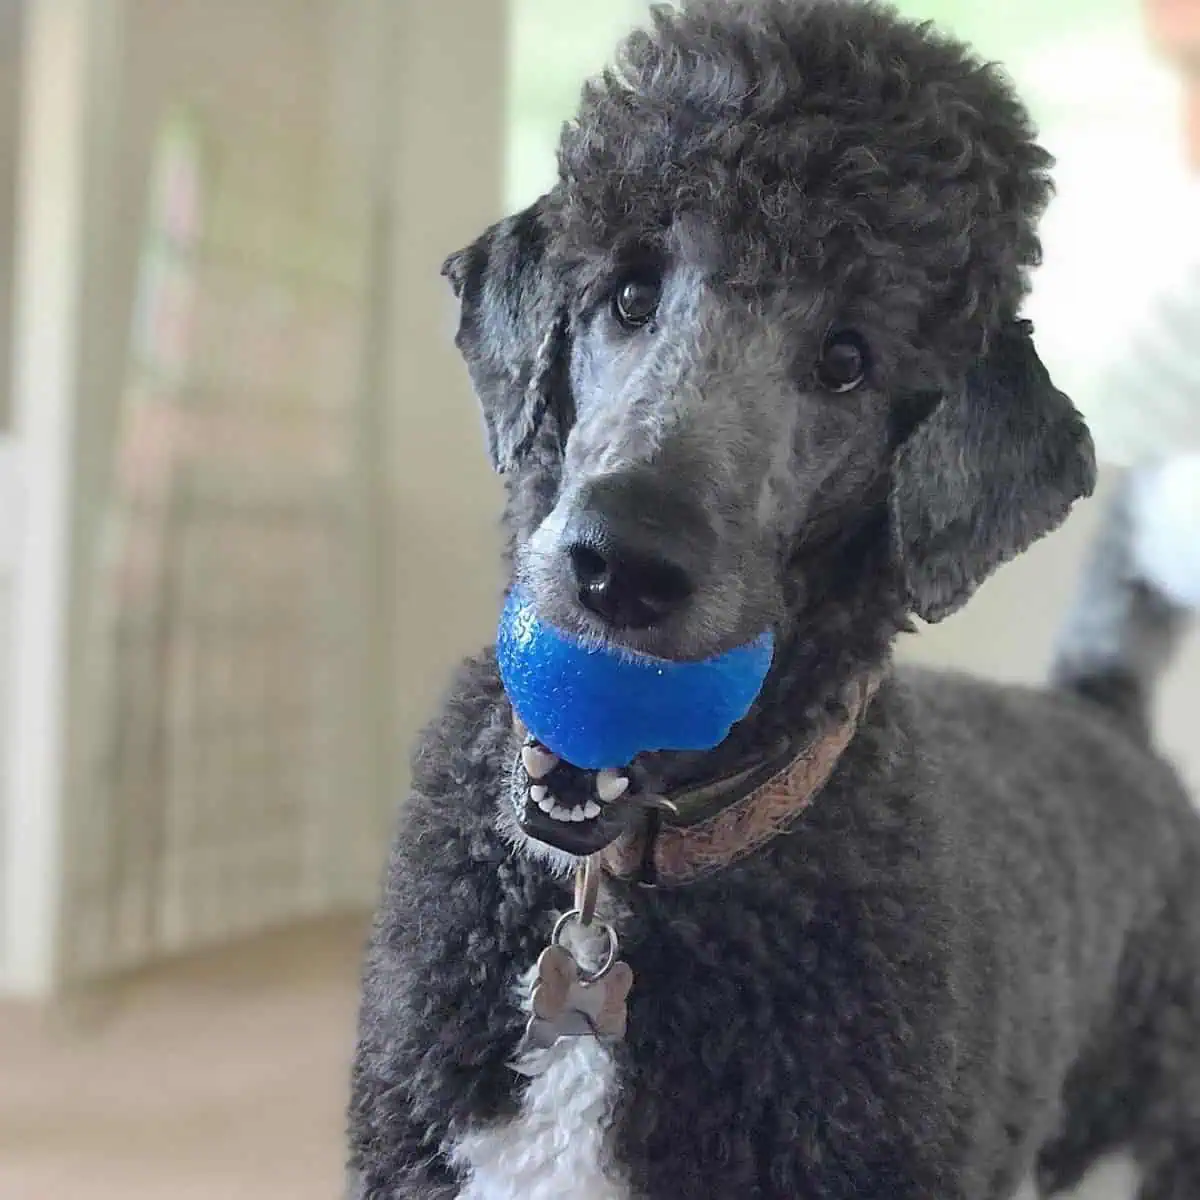 Poodle ready to play a ball